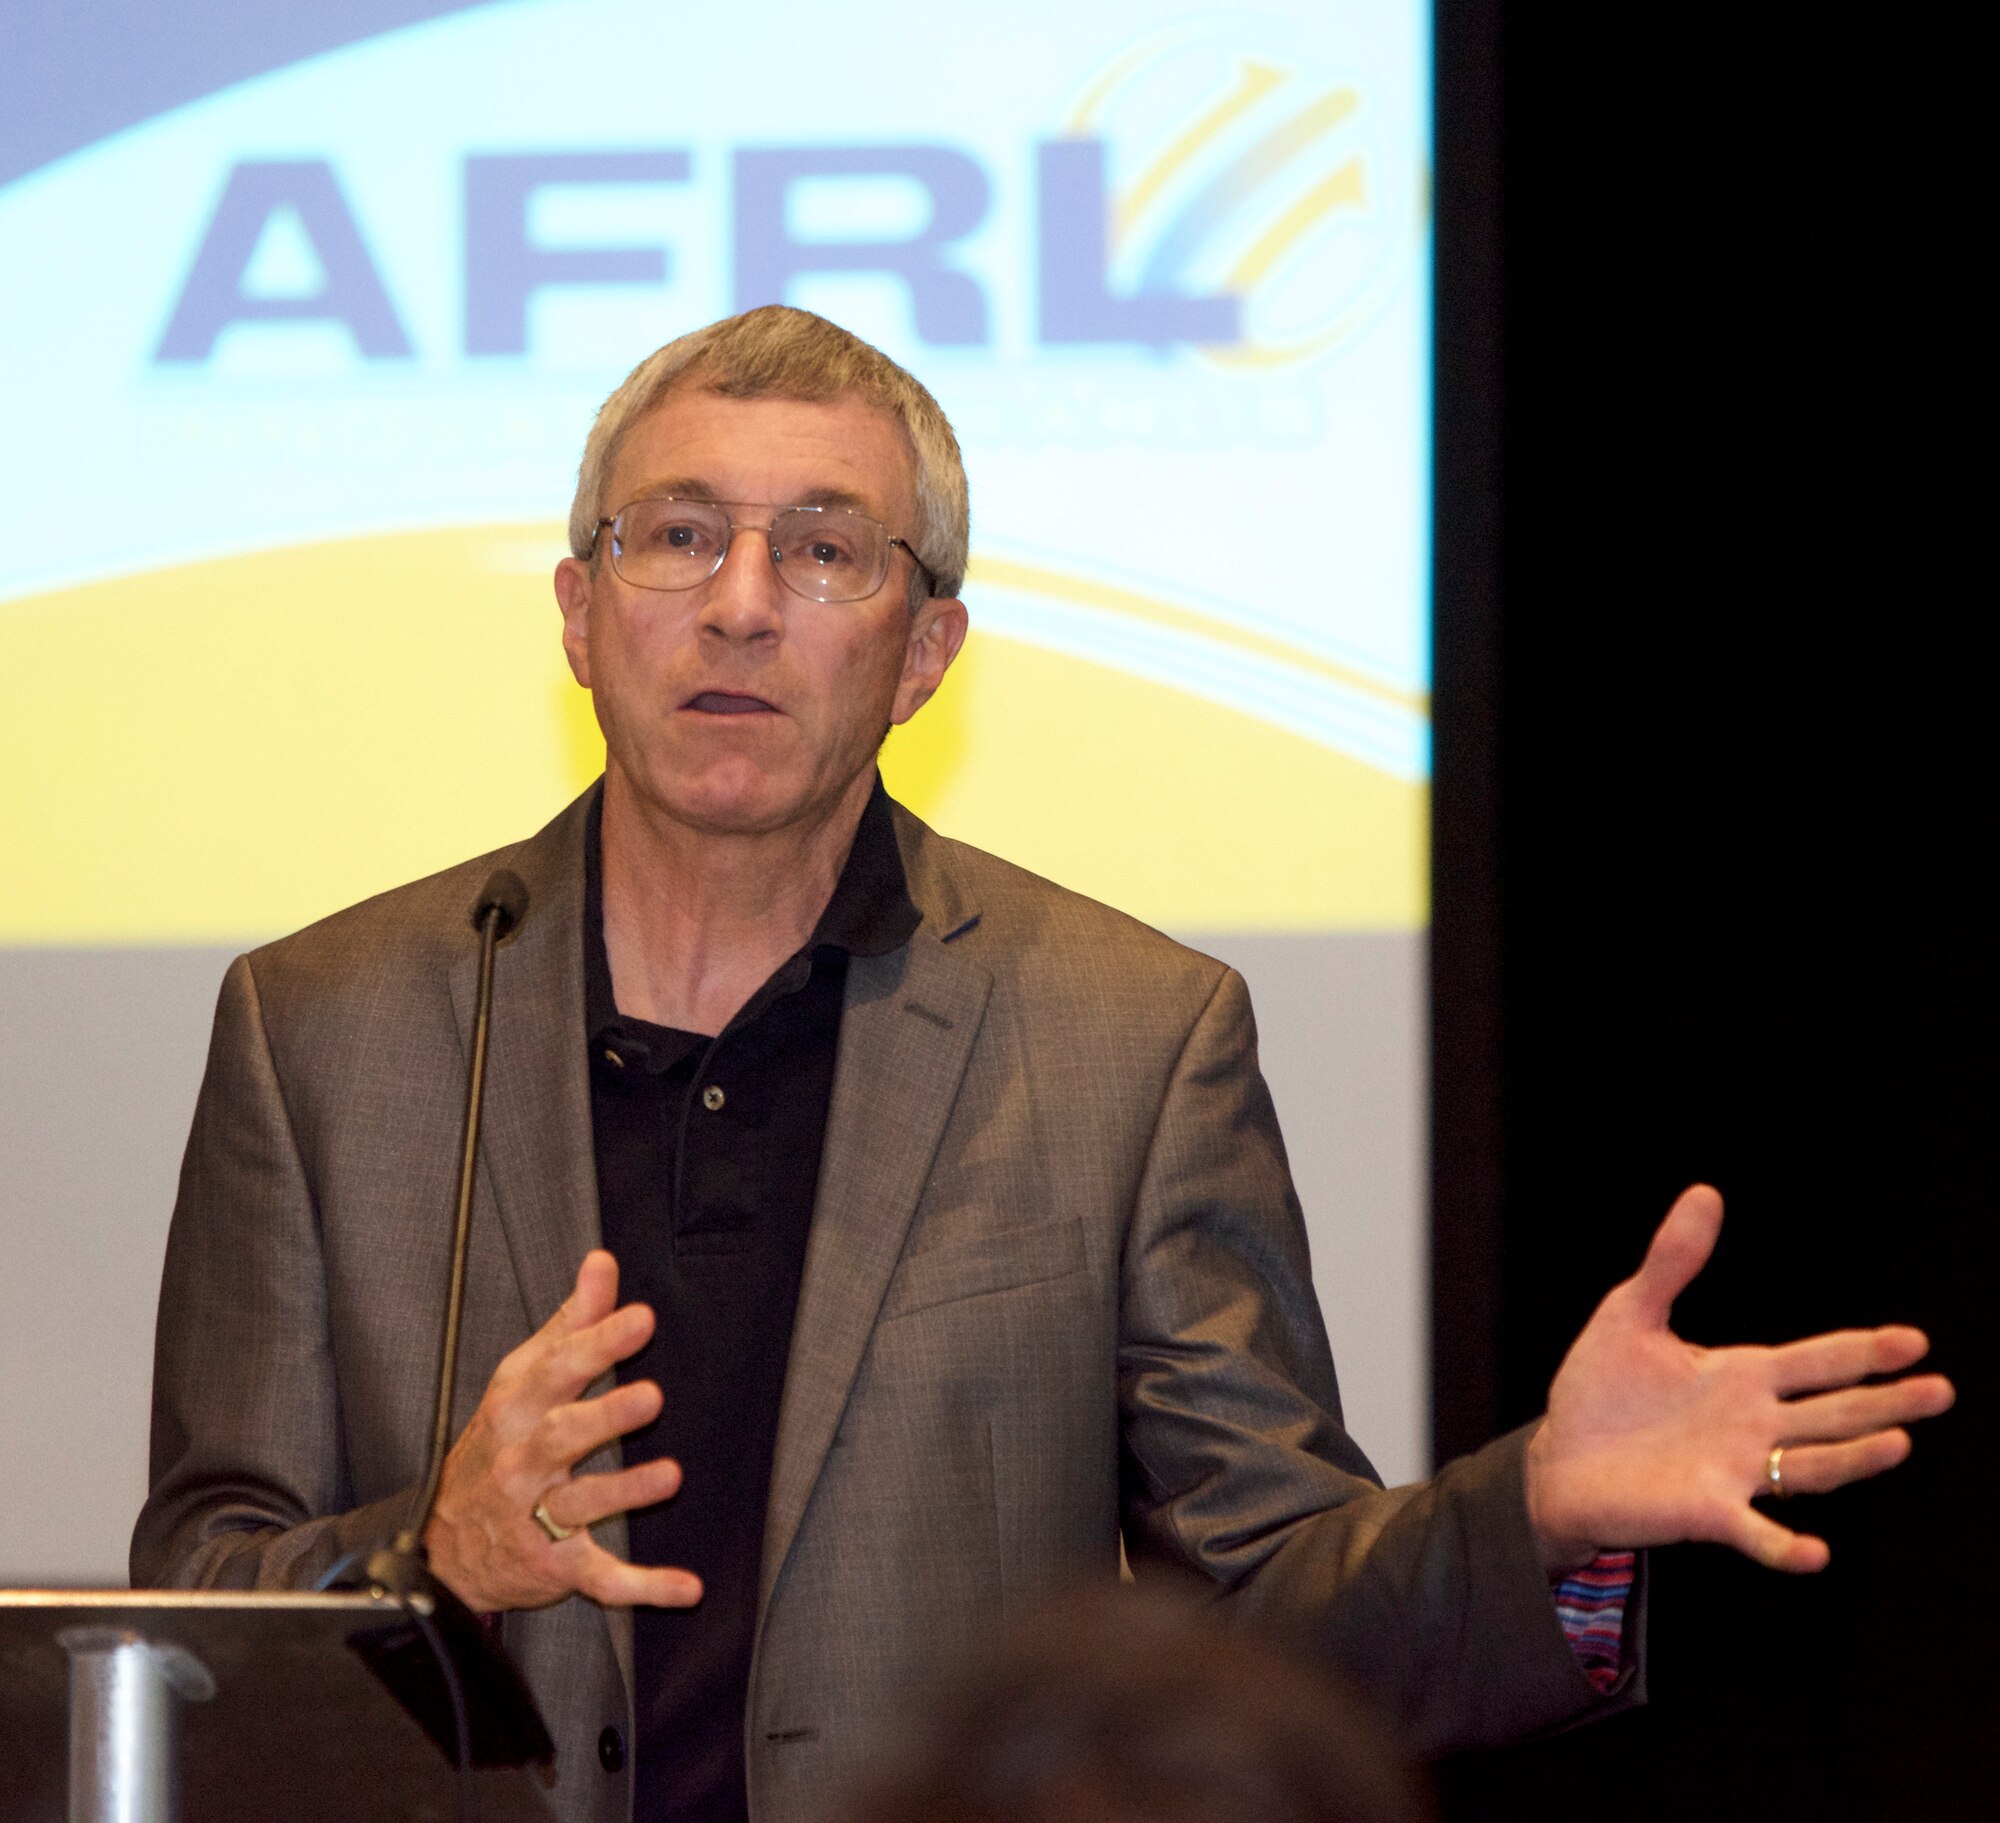 Dr. Neil McCasland director of technology for Applied Technology Associates (ATA) speaks to the Air Force Research Laboratory inventors and their families at AFRL New Mexico’s Innovation Awards celebration held on Aug 9. in Albuquerque, N.M.